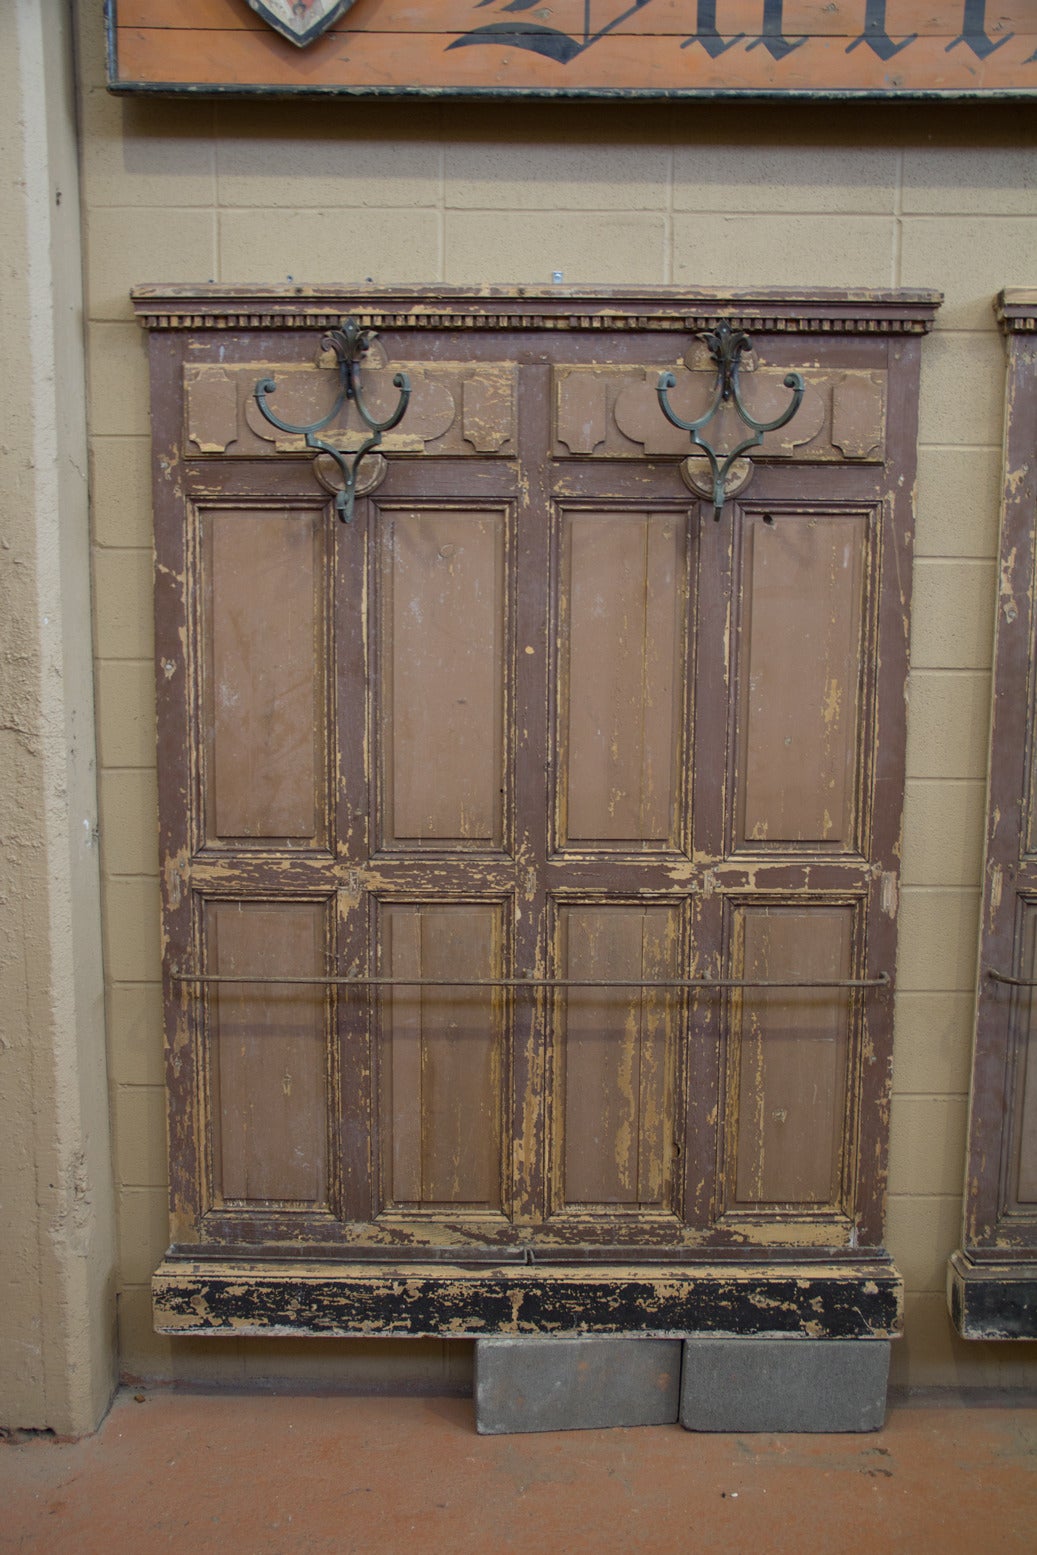 Stunning antique French chateau hallway panel with original zinc umbrella drip gulley, bronze coat hooks and original paint.

We have two available as shown in photos. Price is for one.